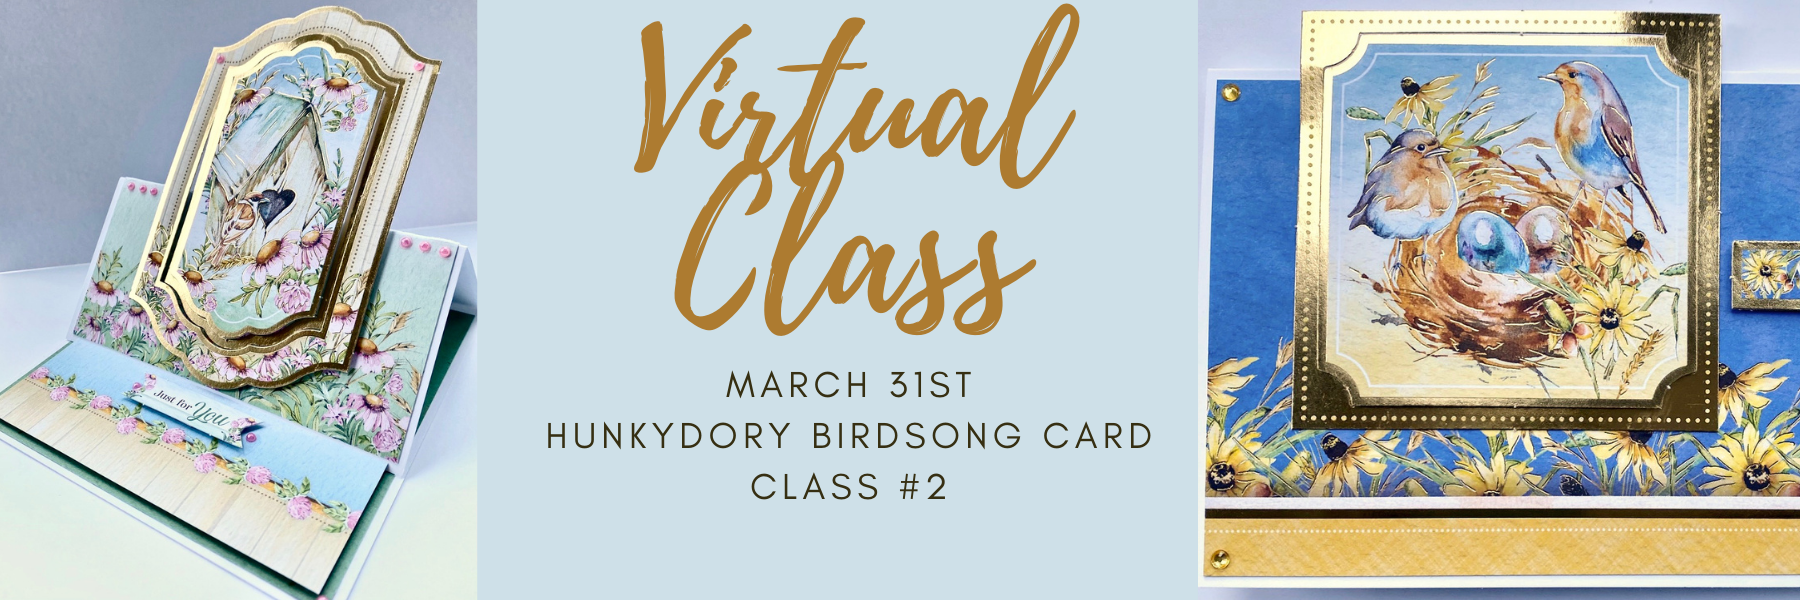 Hunkydory Birdsong Collection Card Class #2- March 31st